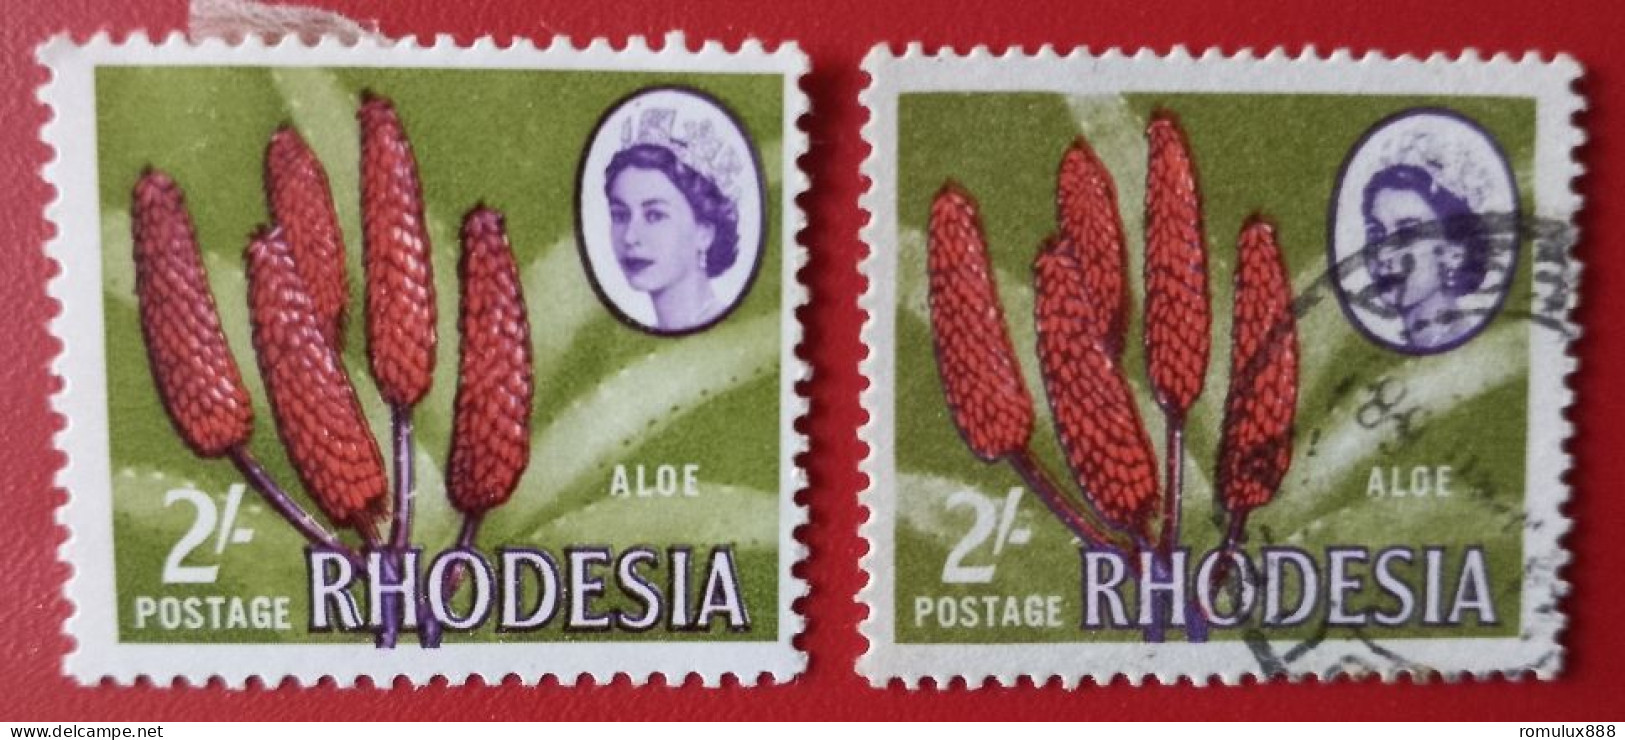 RHODESIA SACC 140-2 SHILLINGS X2 MH/USE WITH FLAW SHIFT OF FLOWER INTO MARGINS - Rhodesien (1964-1980)